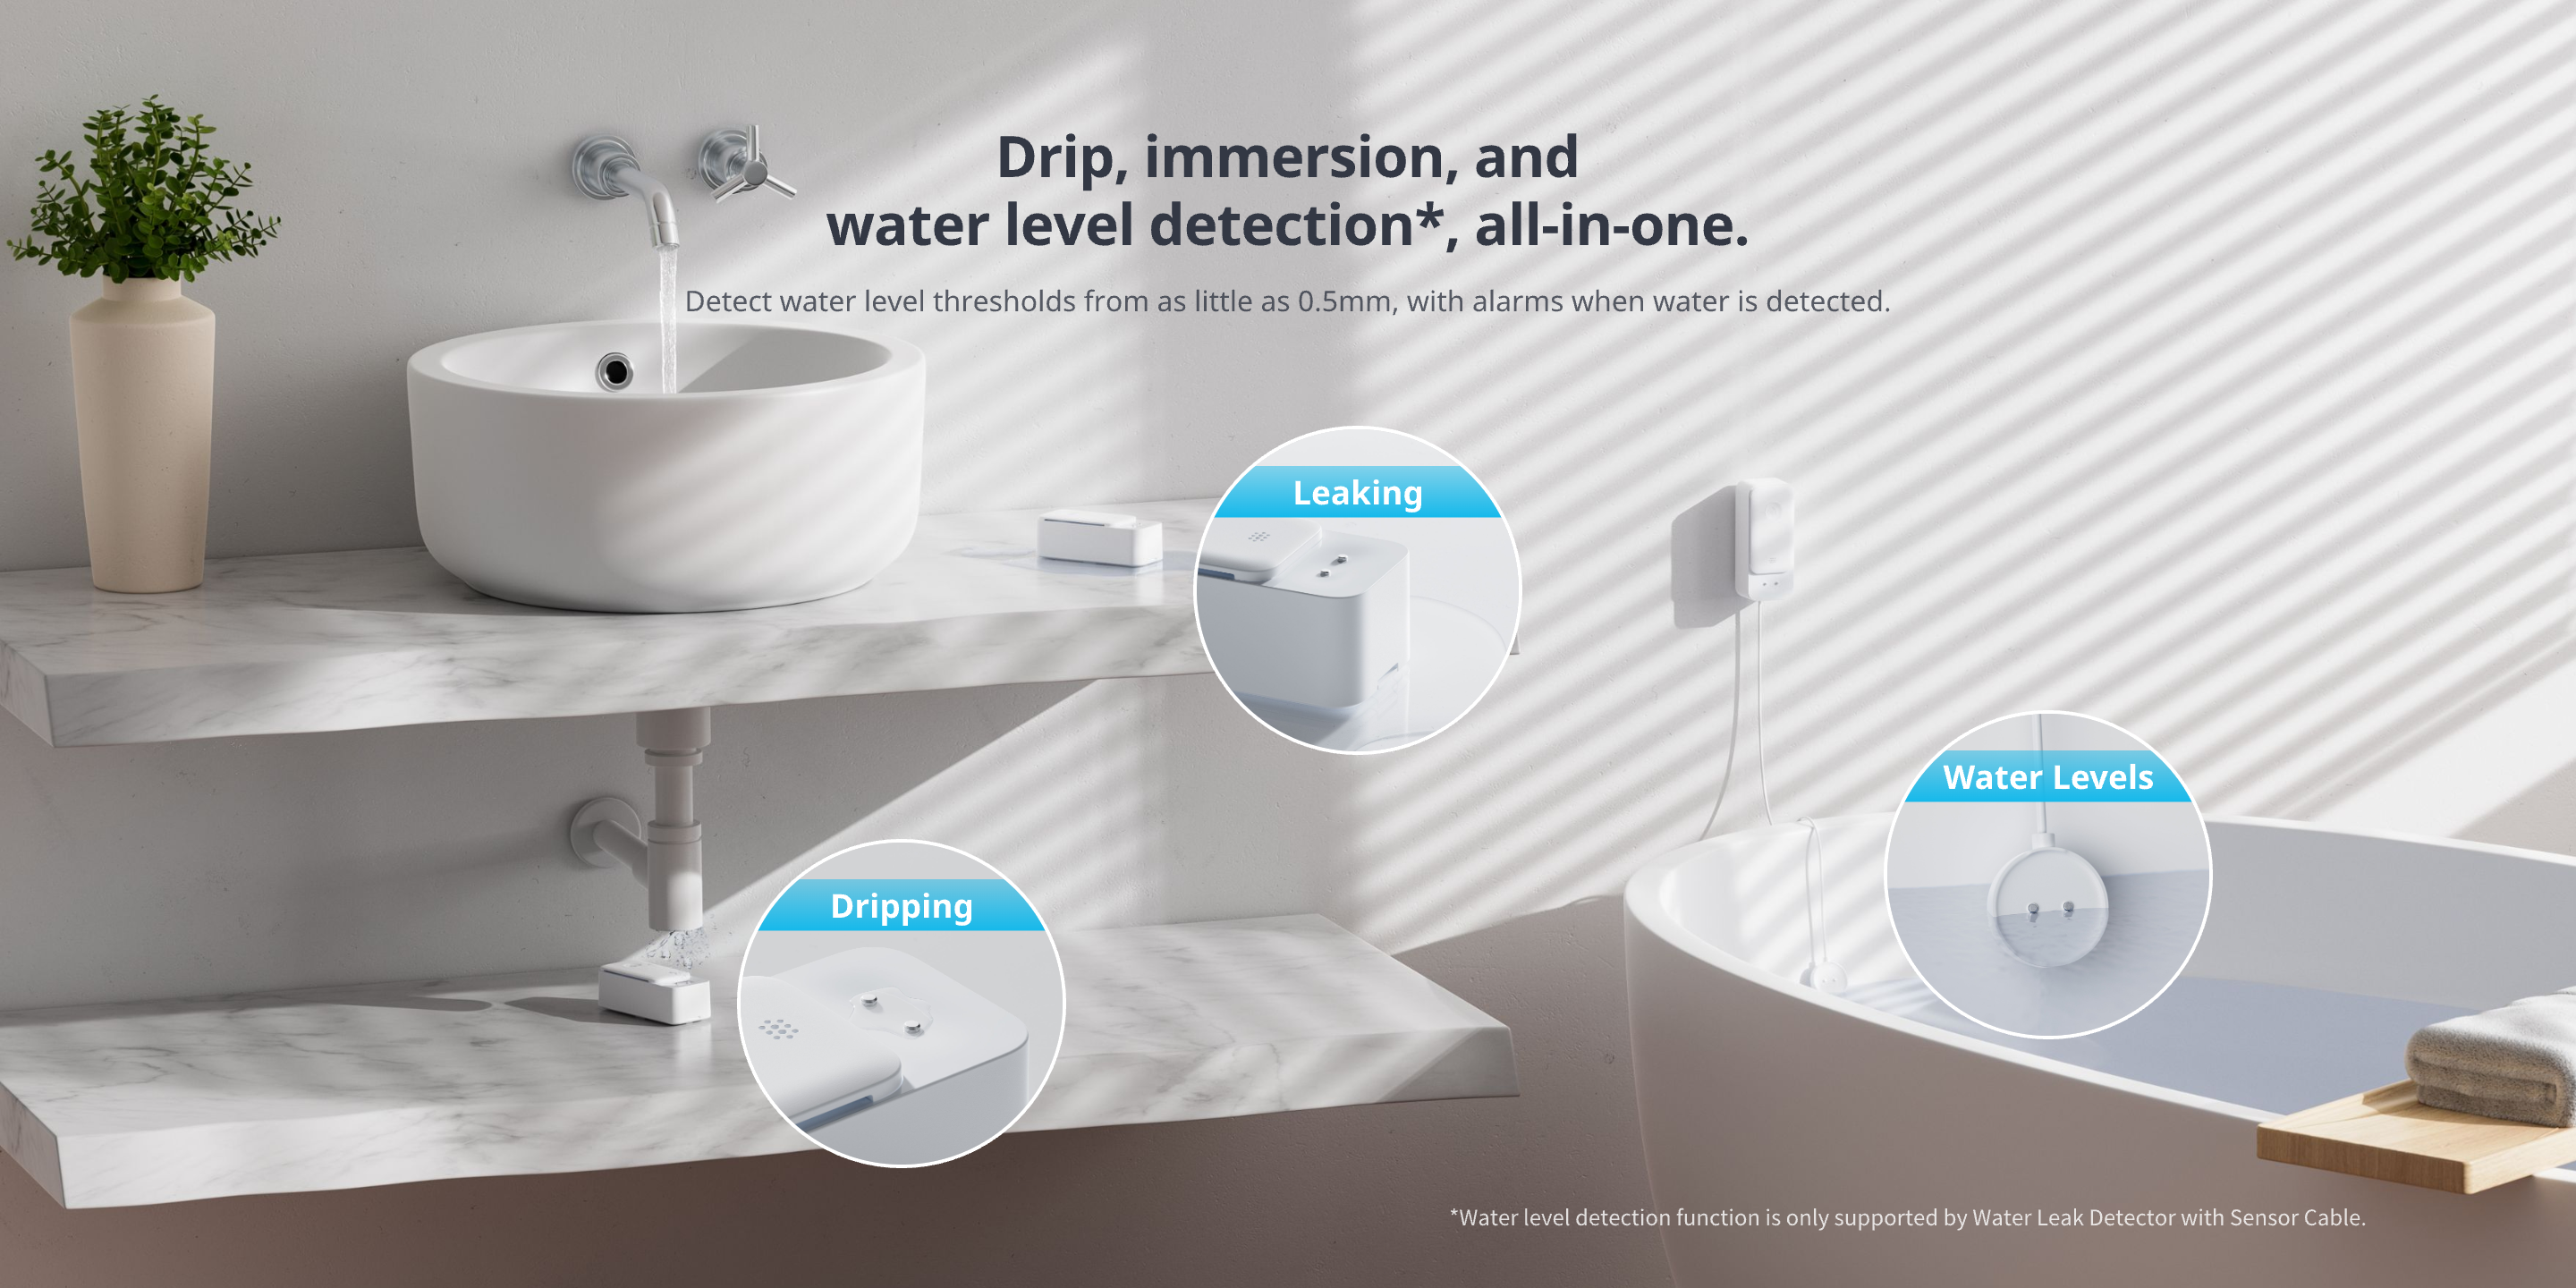 Drip, immersion, and water level detection*, all-in-one.